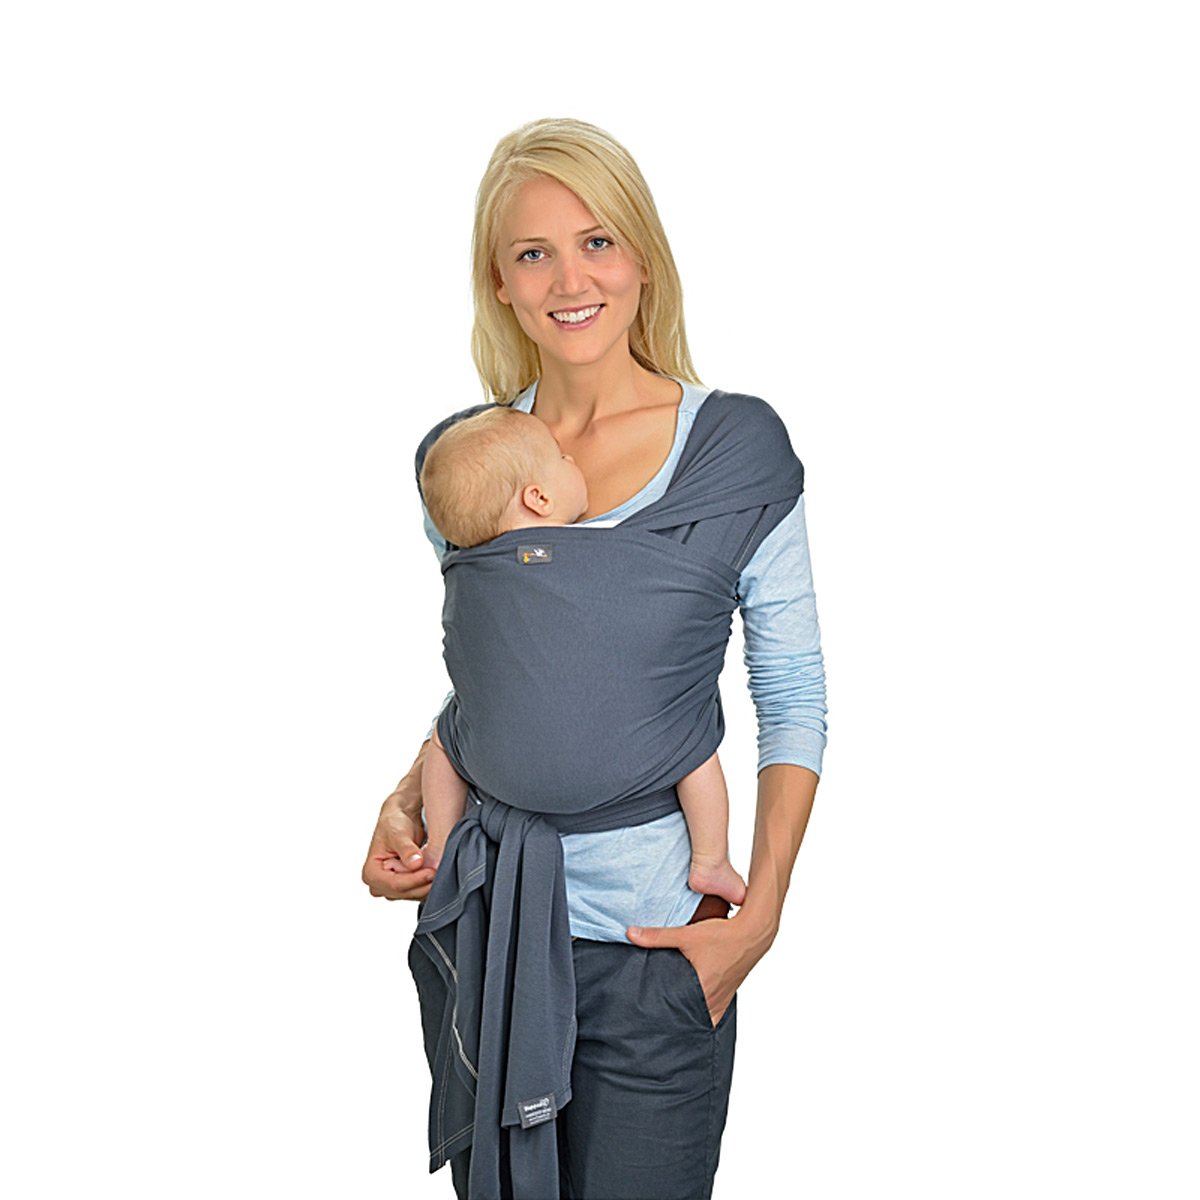 Hoppediz Elastic Baby Sling For Premature And Newborn Babies, Including Carrying Instructions charcoal